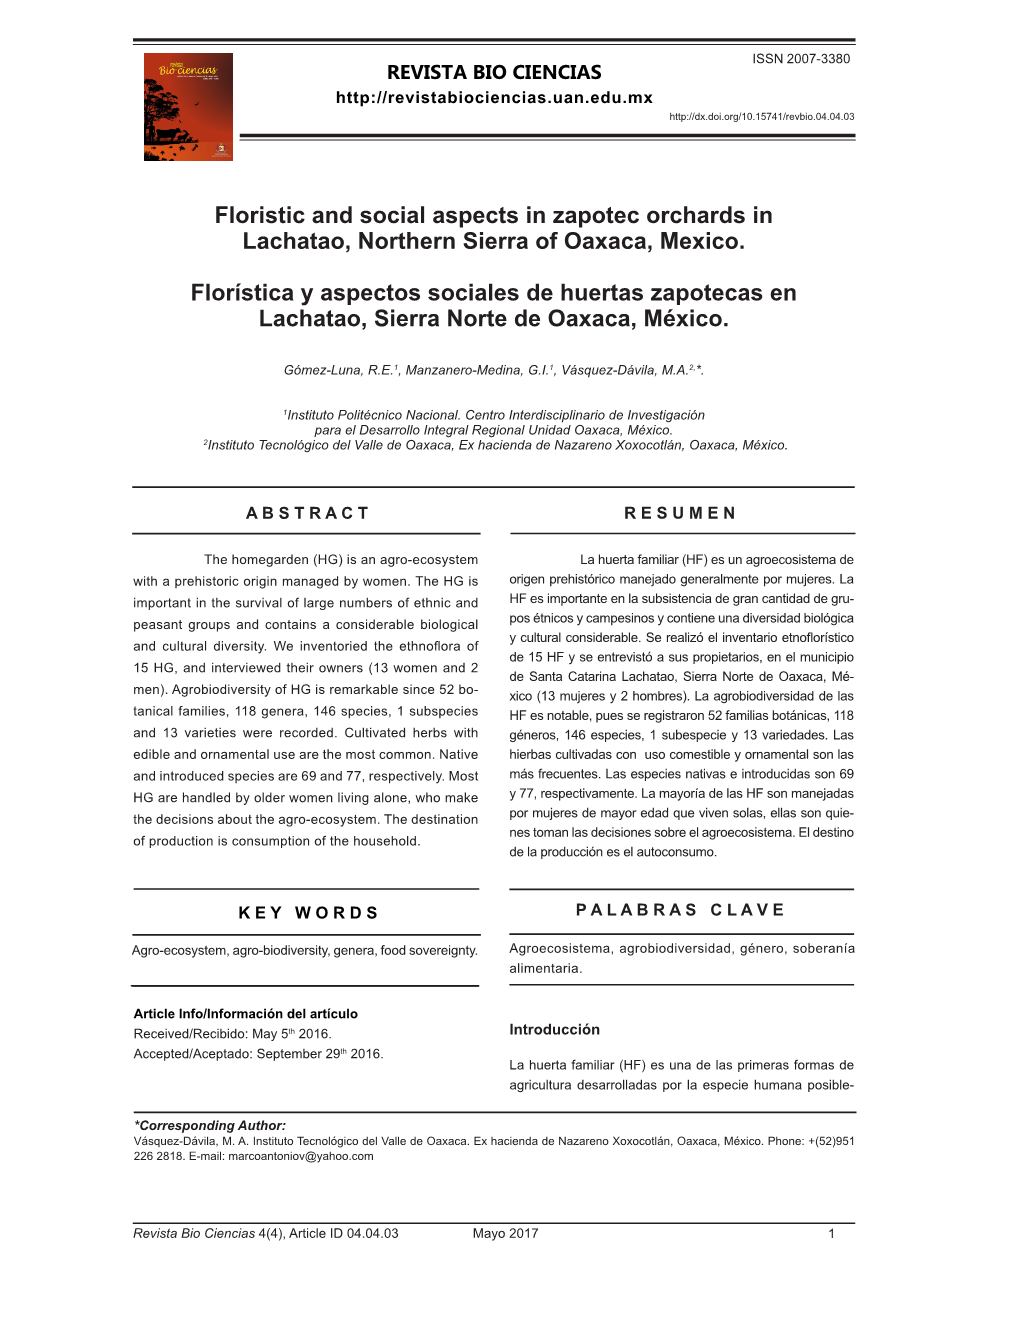 Floristic and Social Aspects in Zapotec Orchards in Lachatao, Northern Sierra of Oaxaca, Mexico